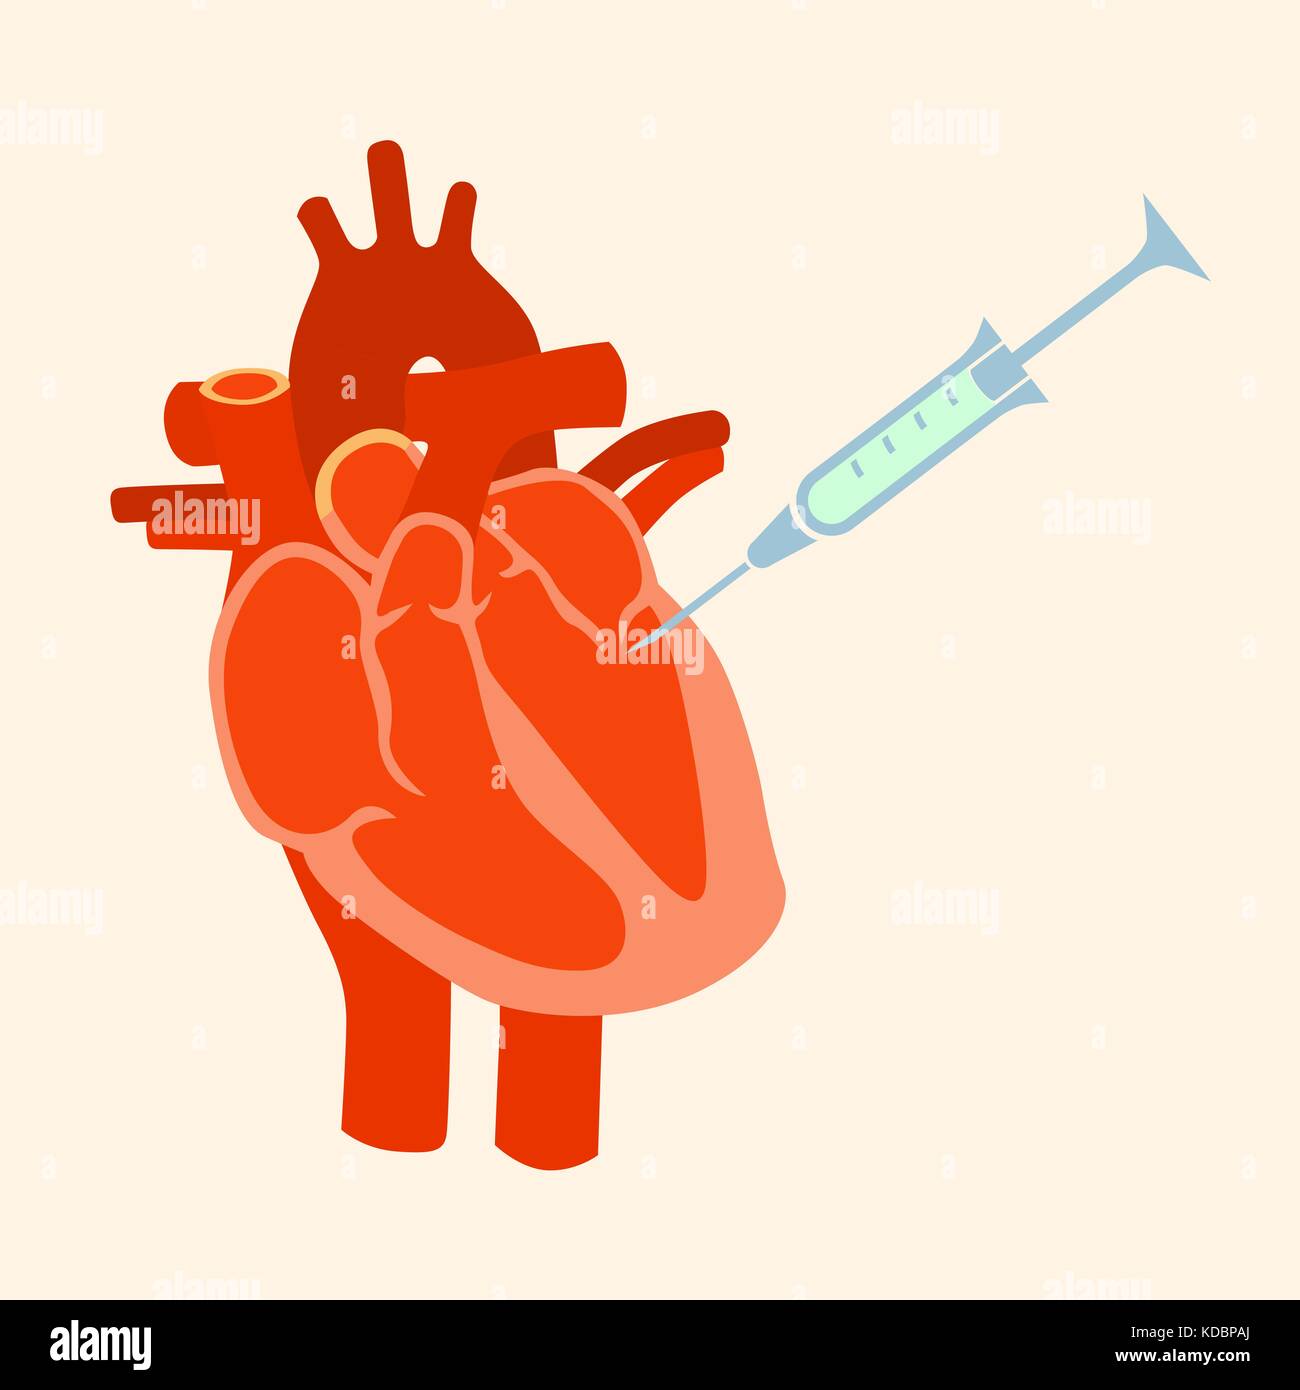 The human heart with a syringe. Flat design style illustration. Stock Vector